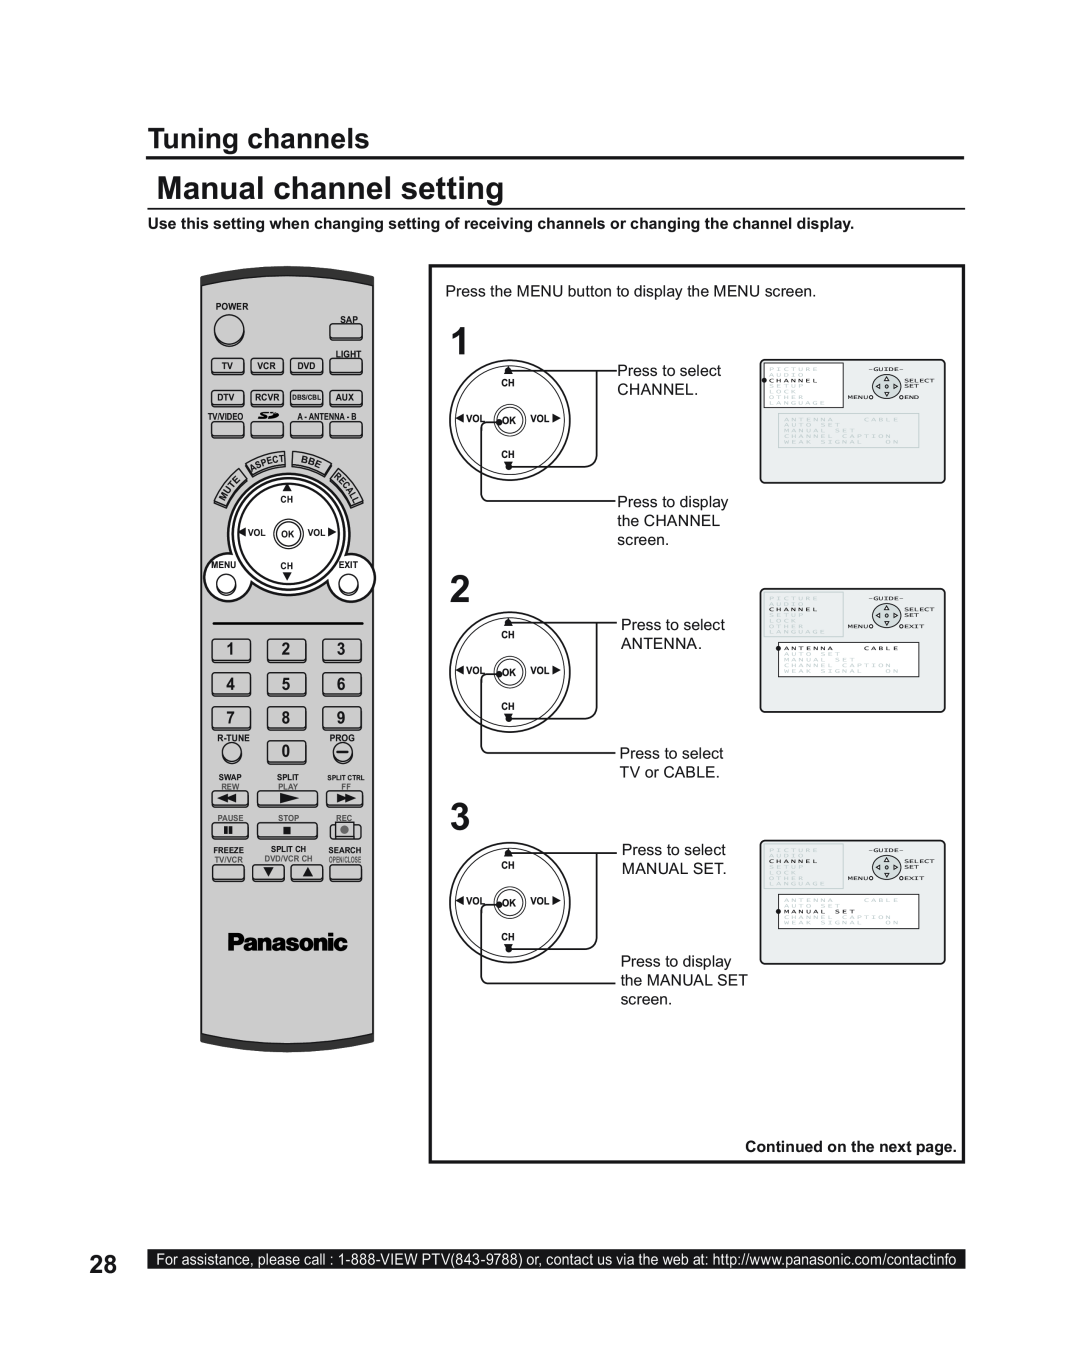 Panasonic PT-50LC14, PT-43LC14, PT-60LC14 manual Manual channel setting, Tuning channels, Continued on the next page 